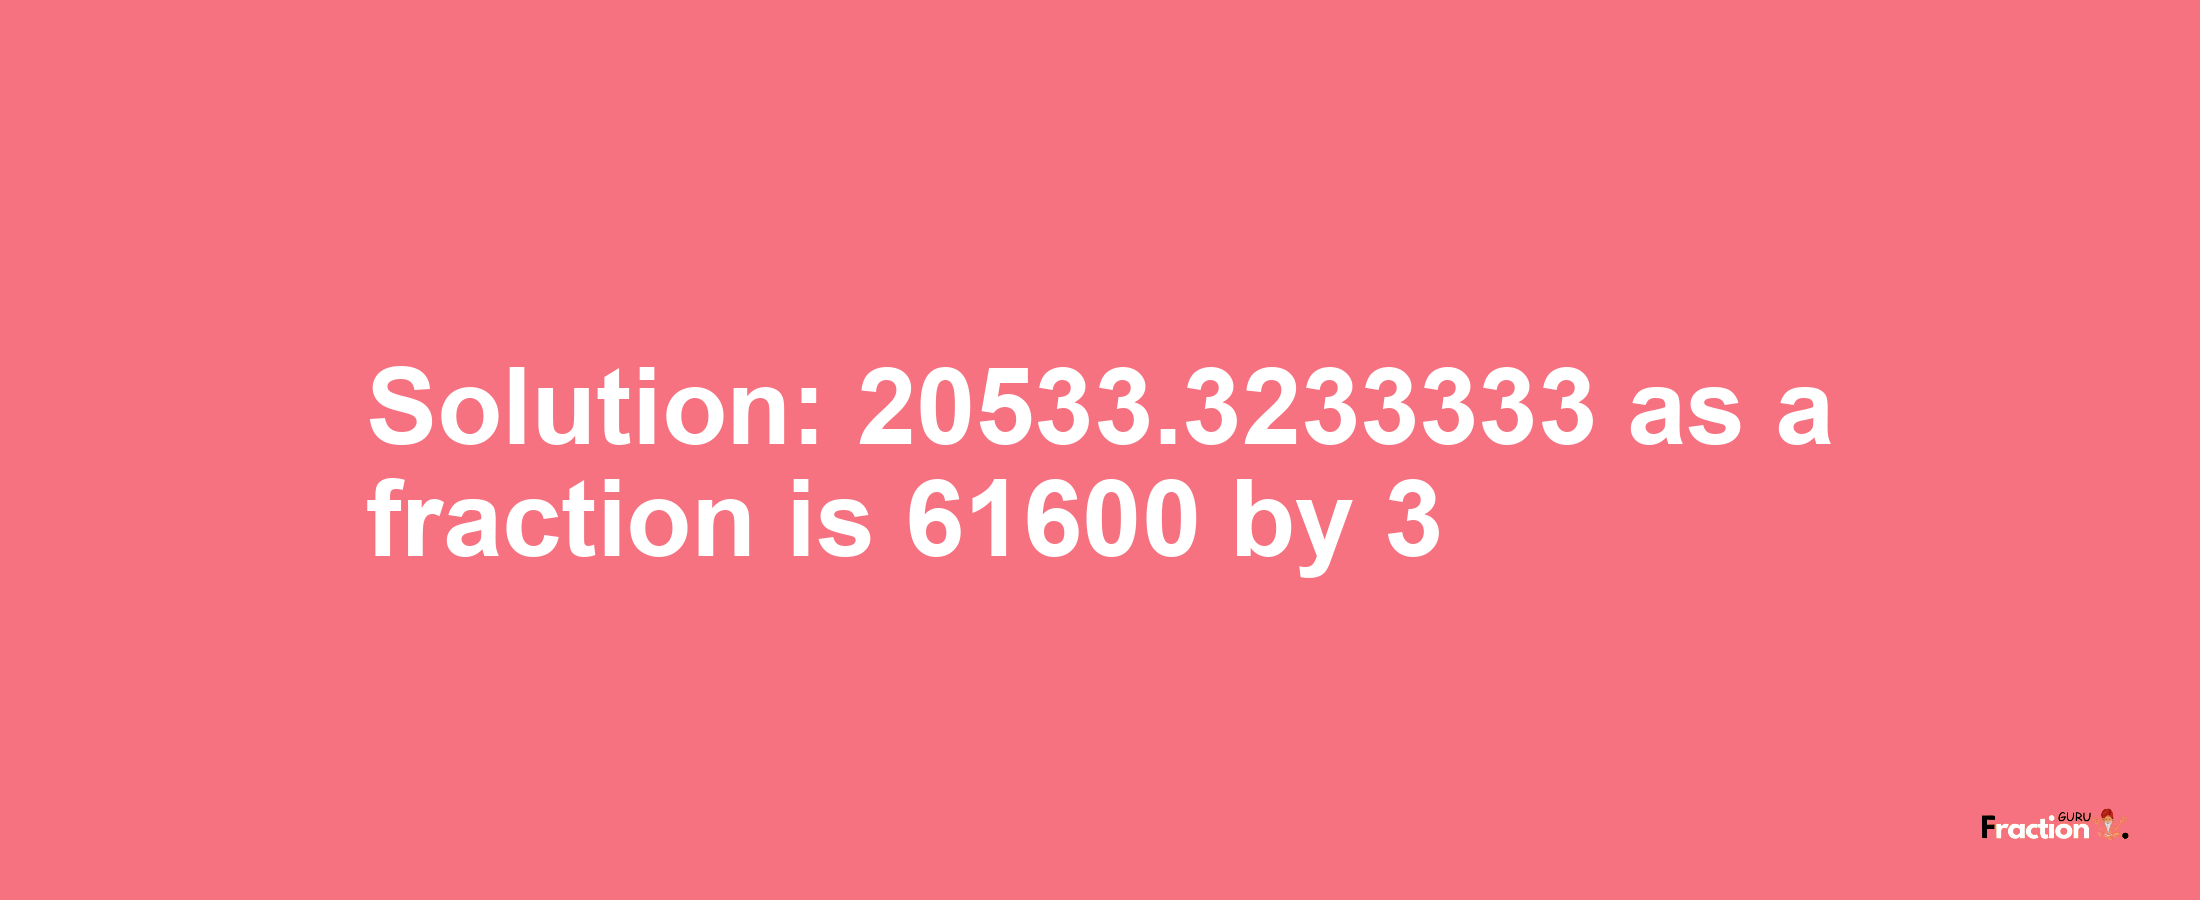 Solution:20533.3233333 as a fraction is 61600/3